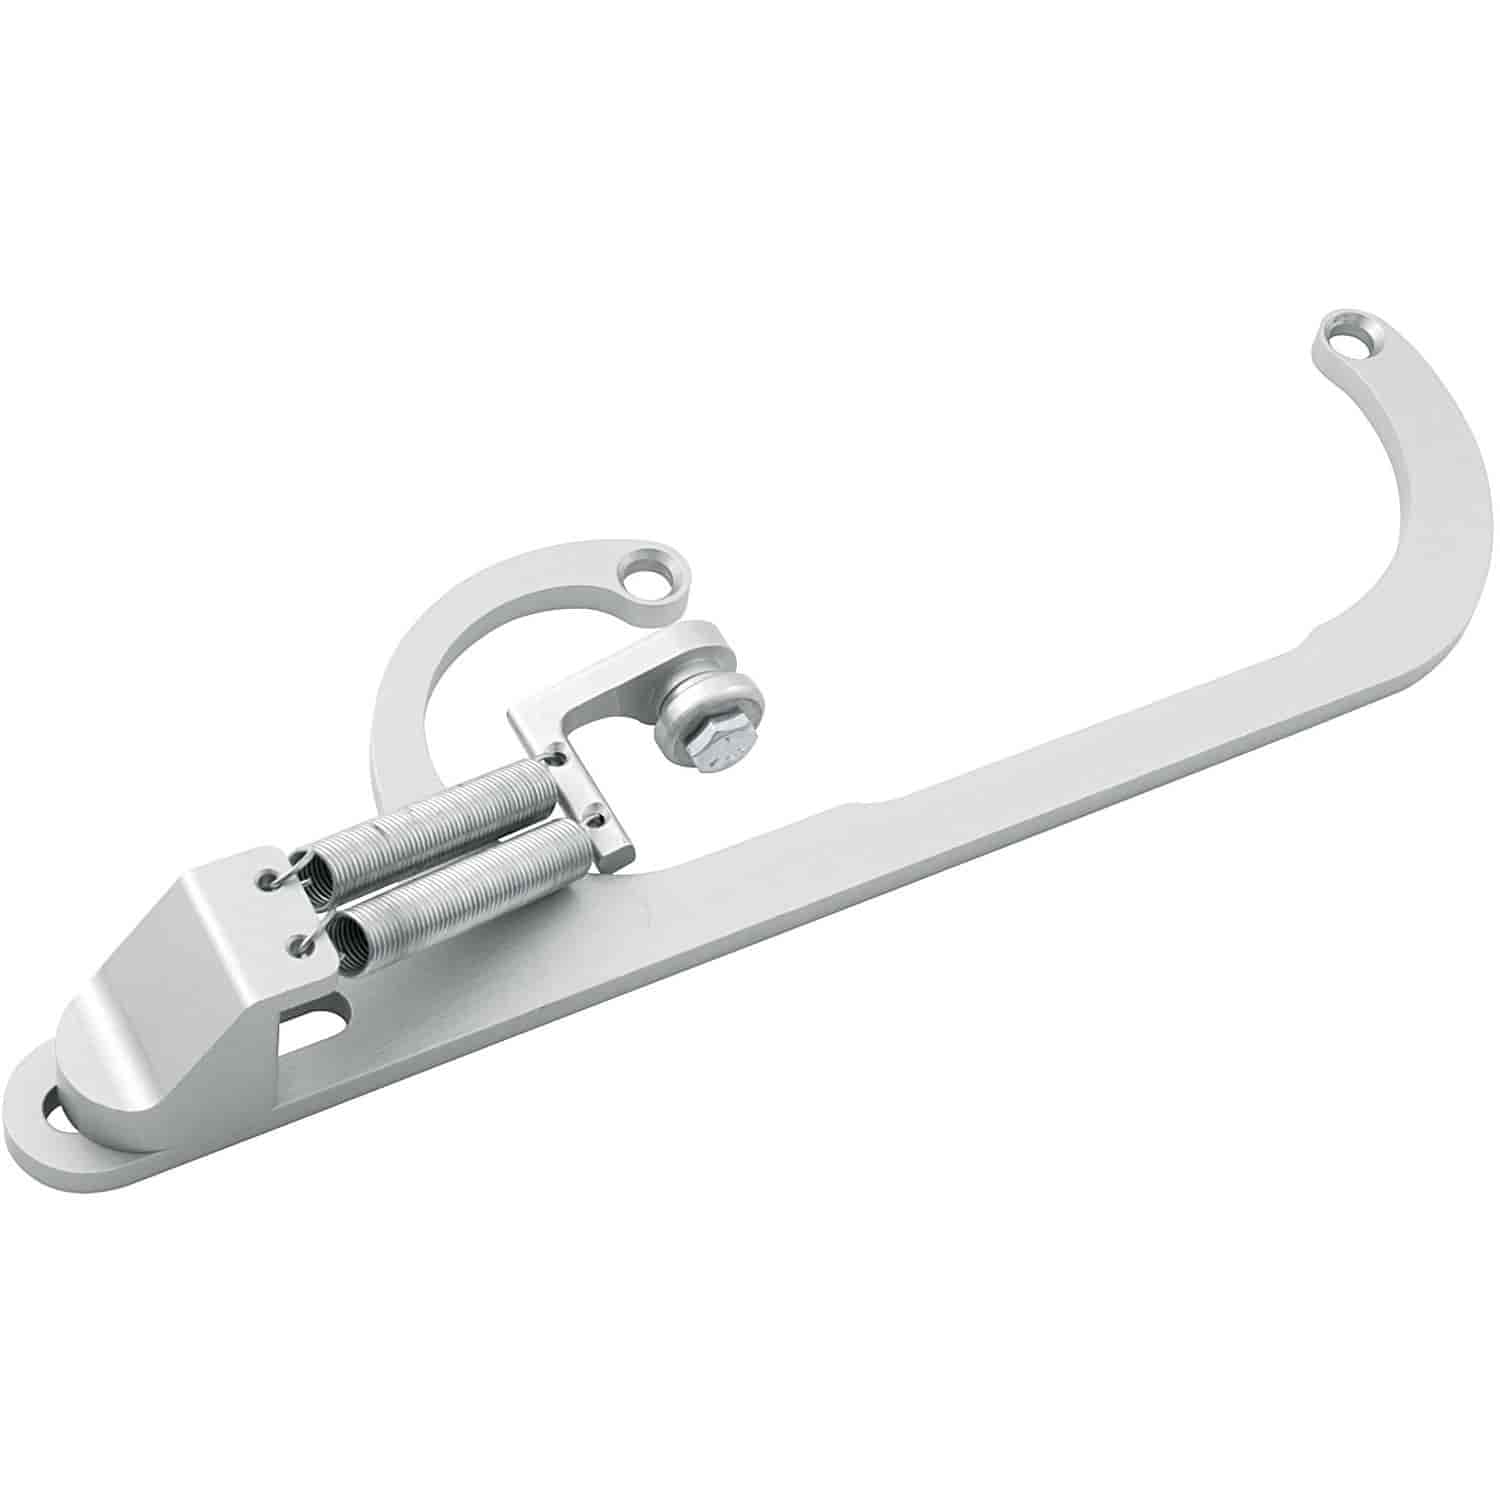 Throttle Bracket With Return Springs For 4150 and